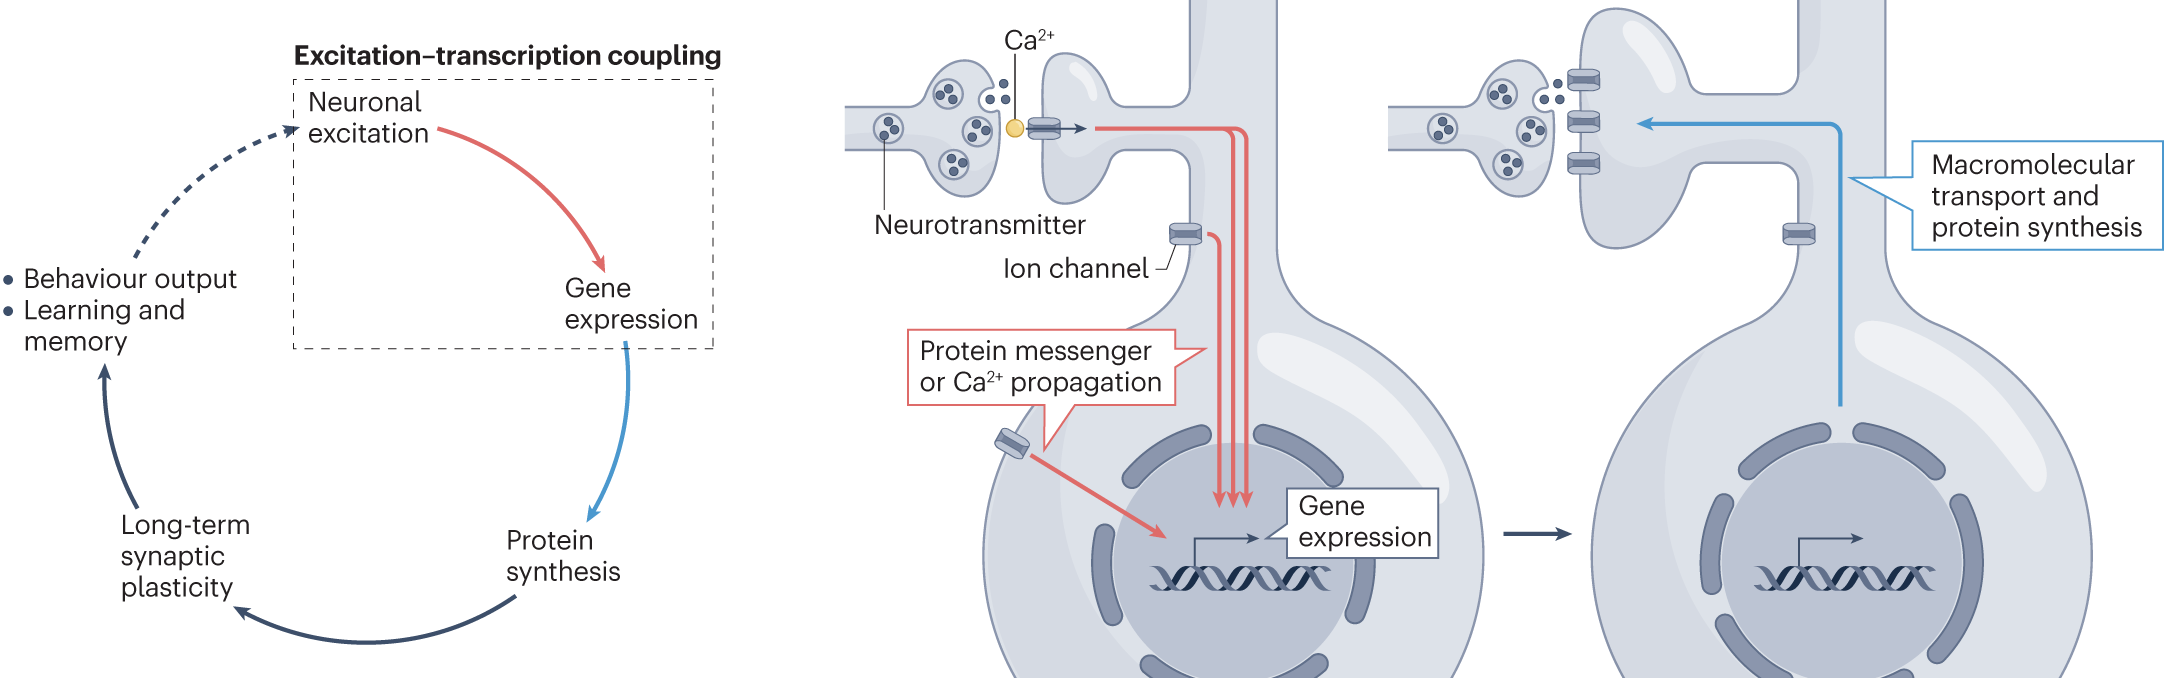 Excitation–transcription coupling, neuronal gene expression and